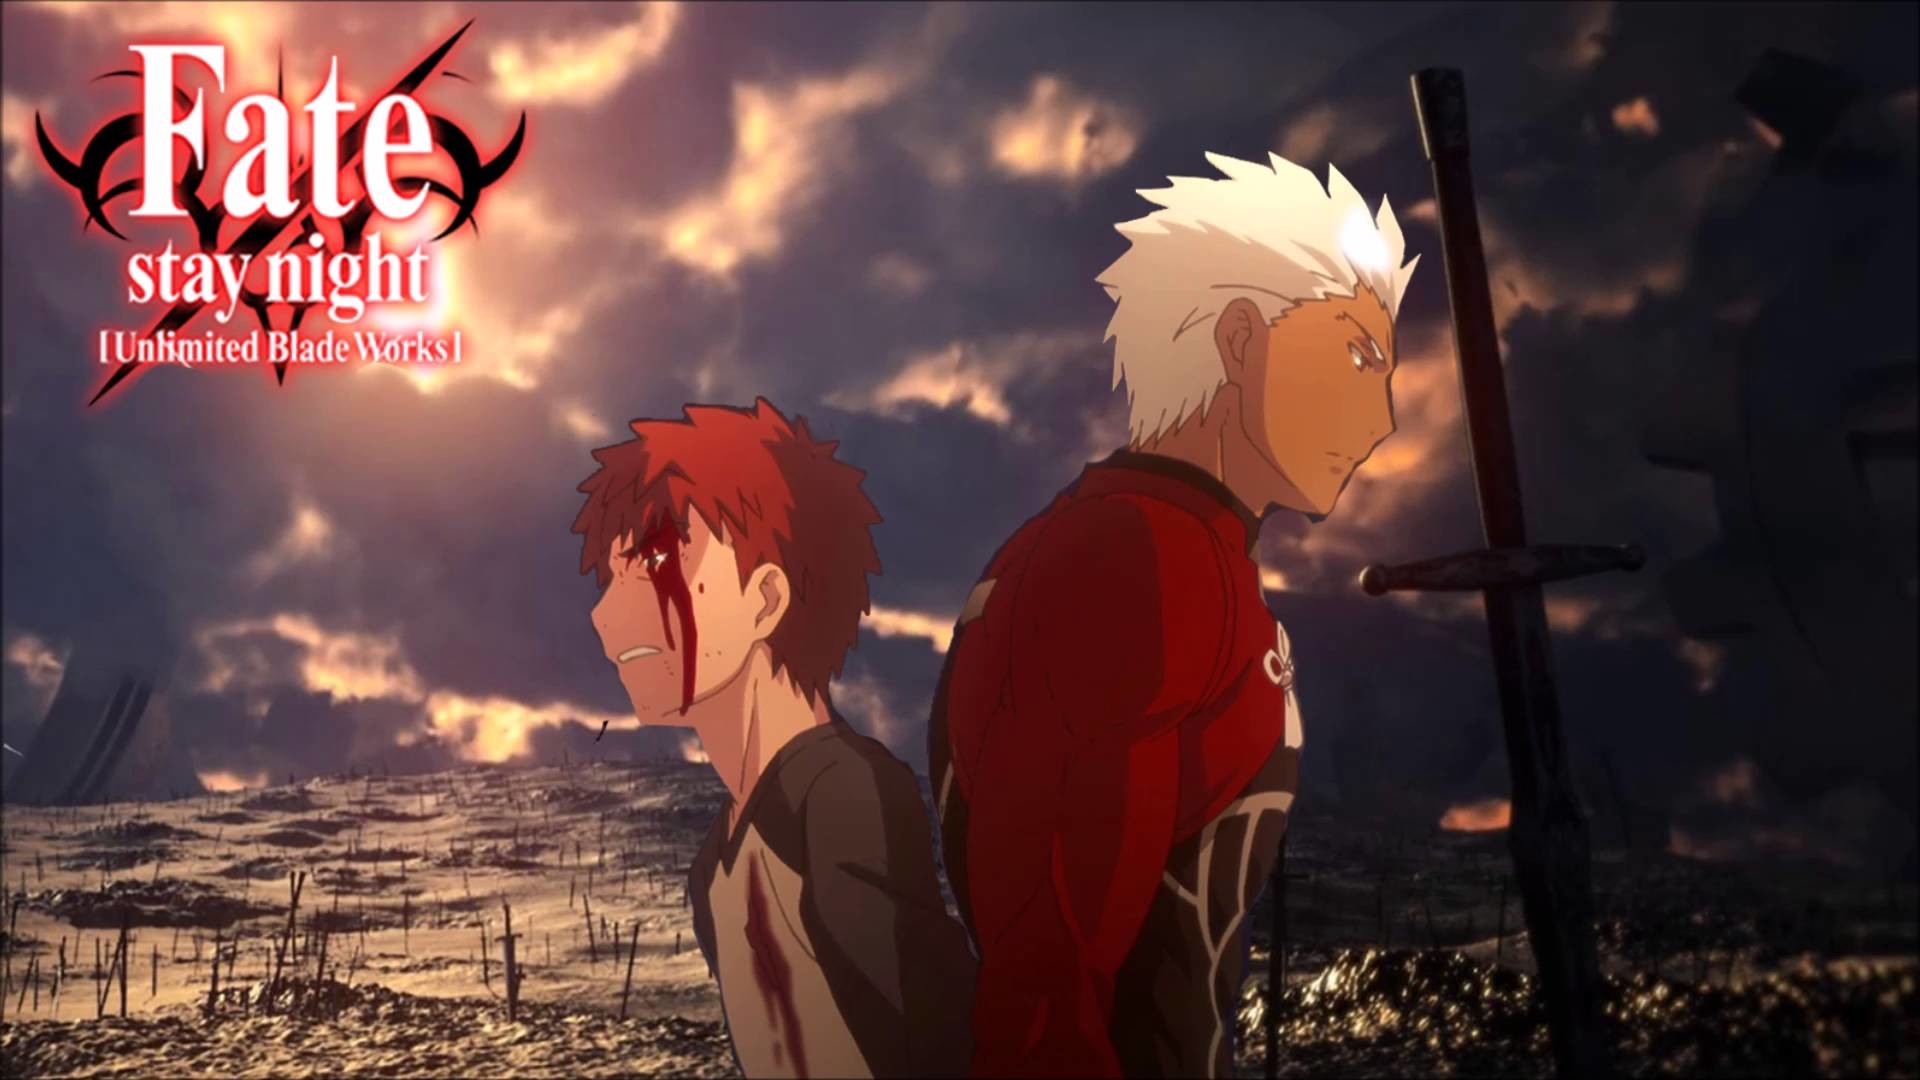 Ringtone Aimer Brave Shine Fate Stay Night Unlimited Blade Works Youtube